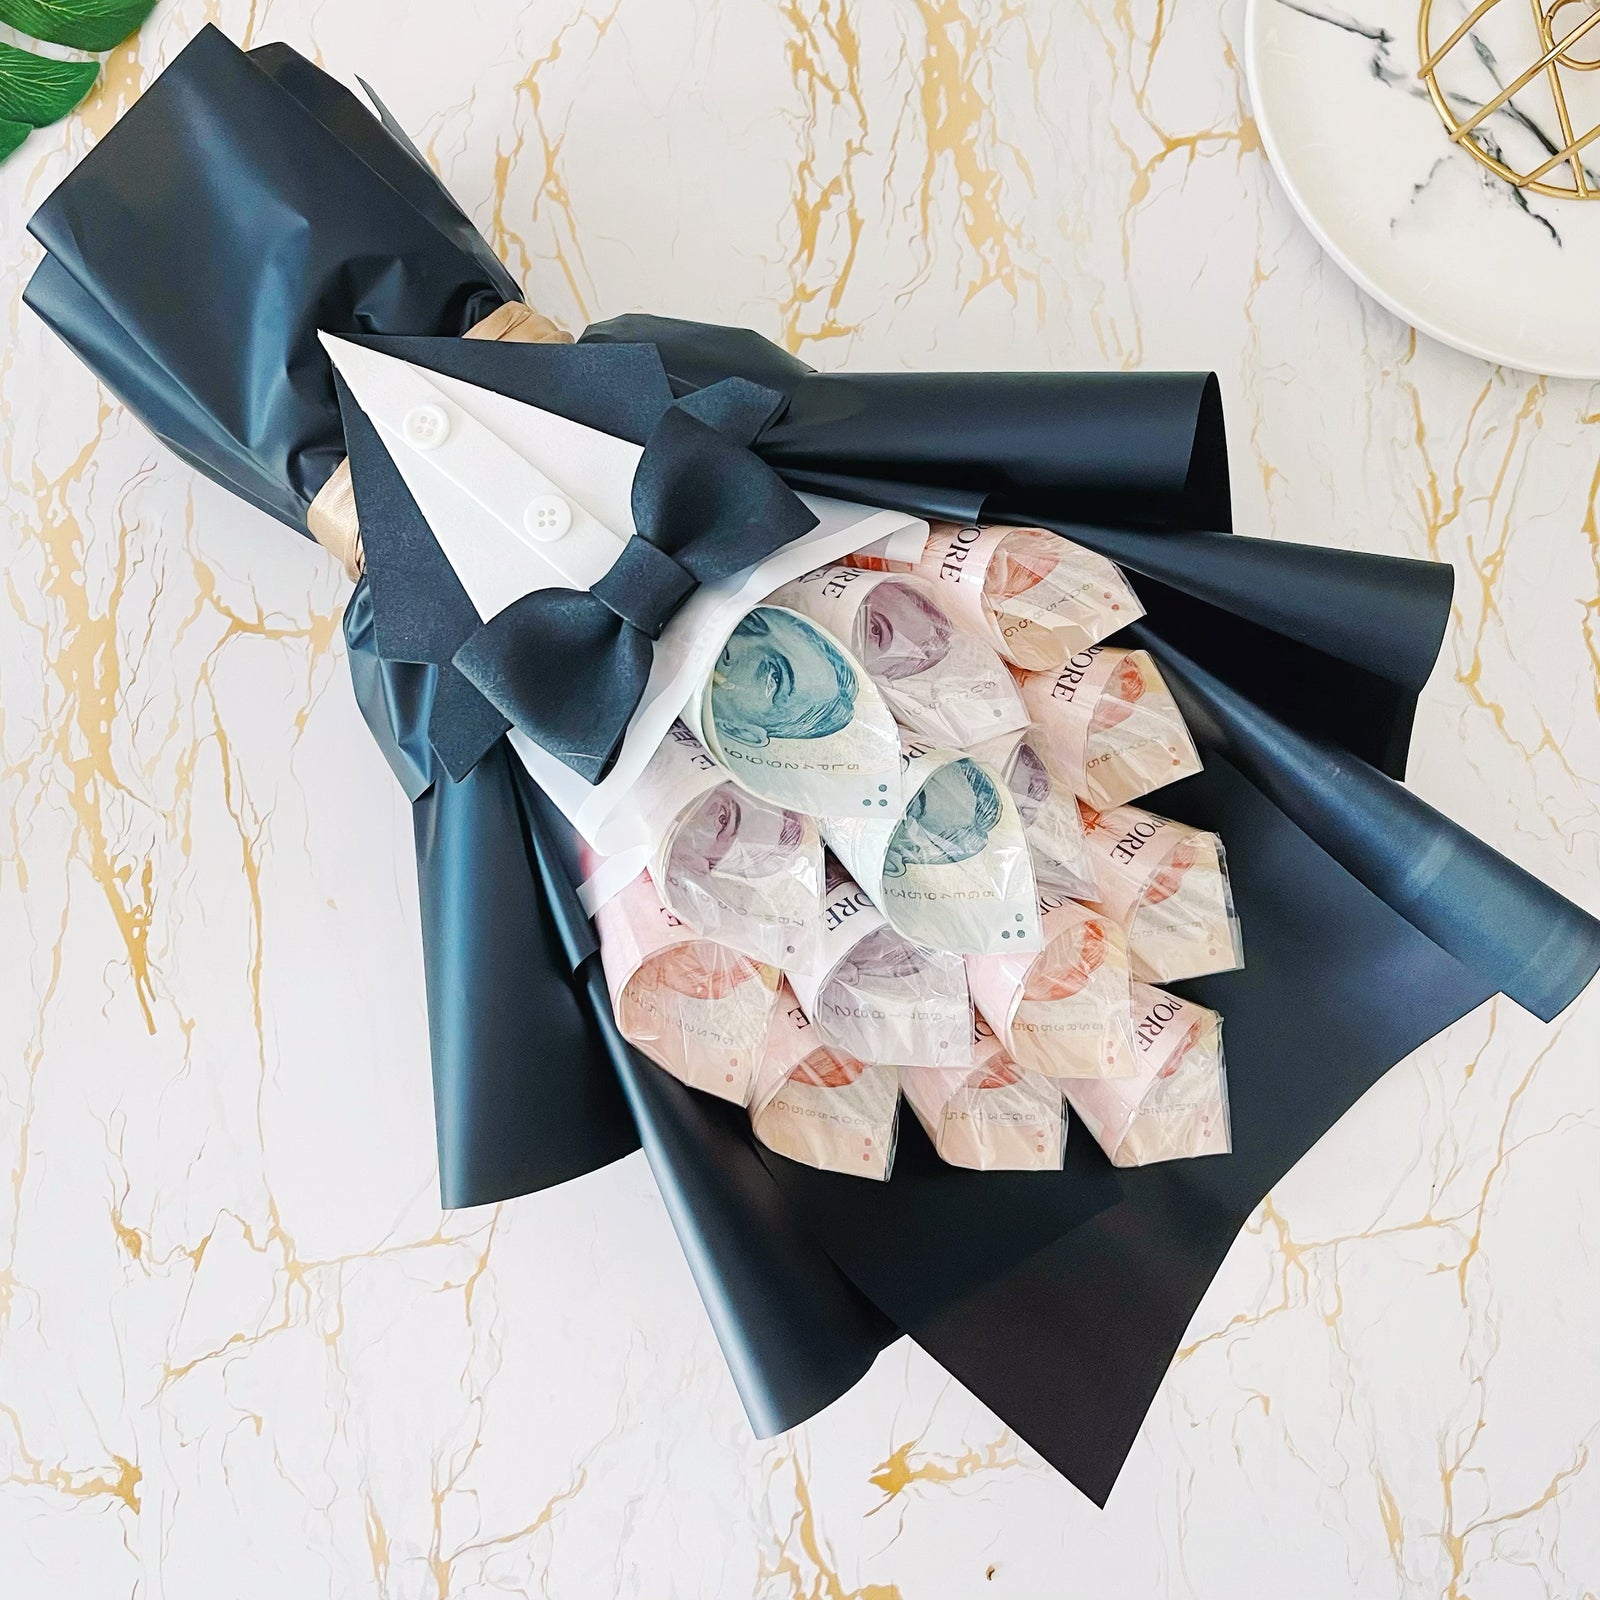 Gentleman Money Bouquet for Him | Gift for Him Ideas ( $188 cash value inclusive)(1 day pre-order) - Rainbowly Fresh Fruit Gift and Flower Arrangments